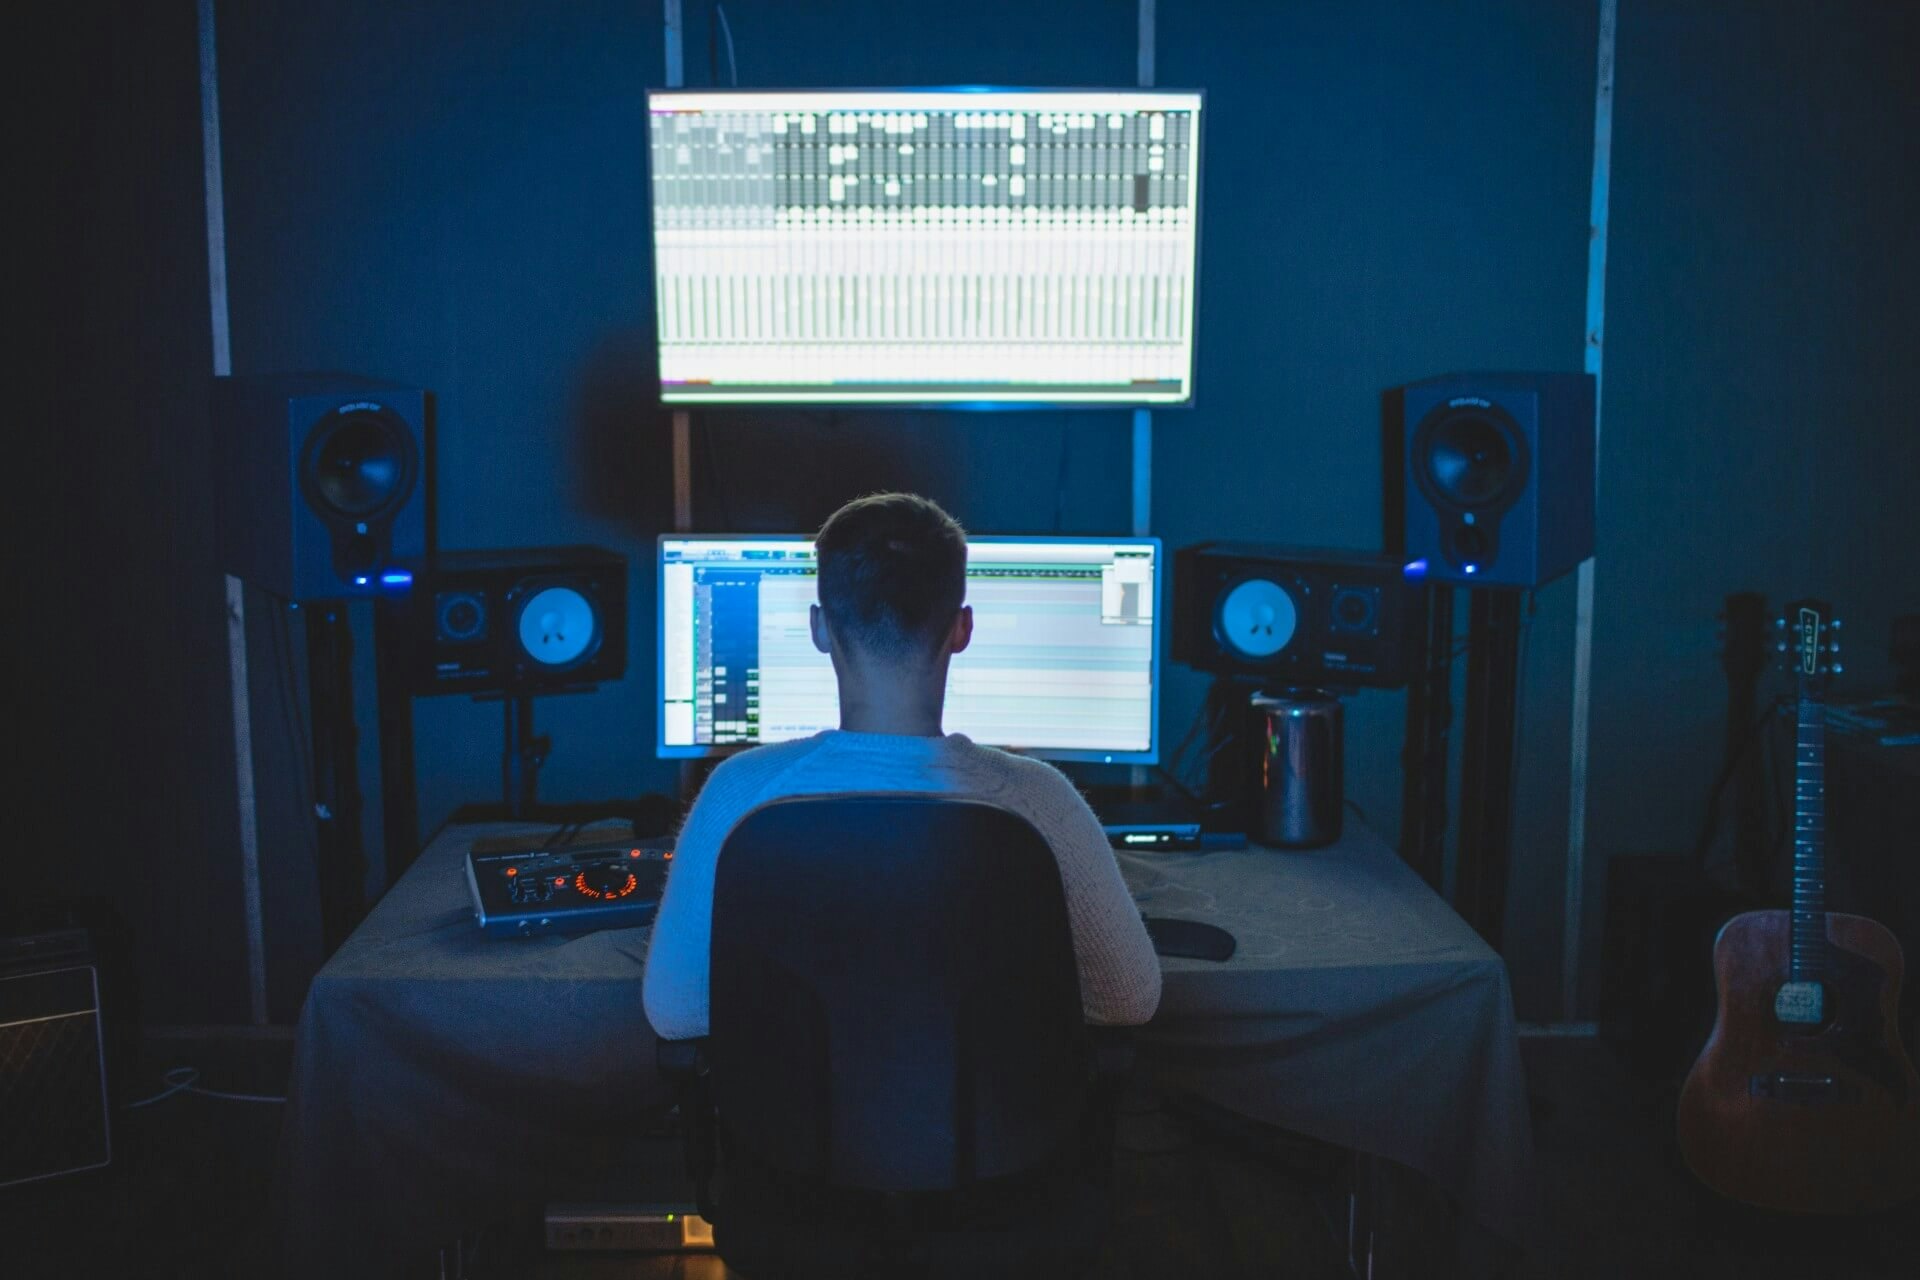 Producer using a recording studio for music production in NY